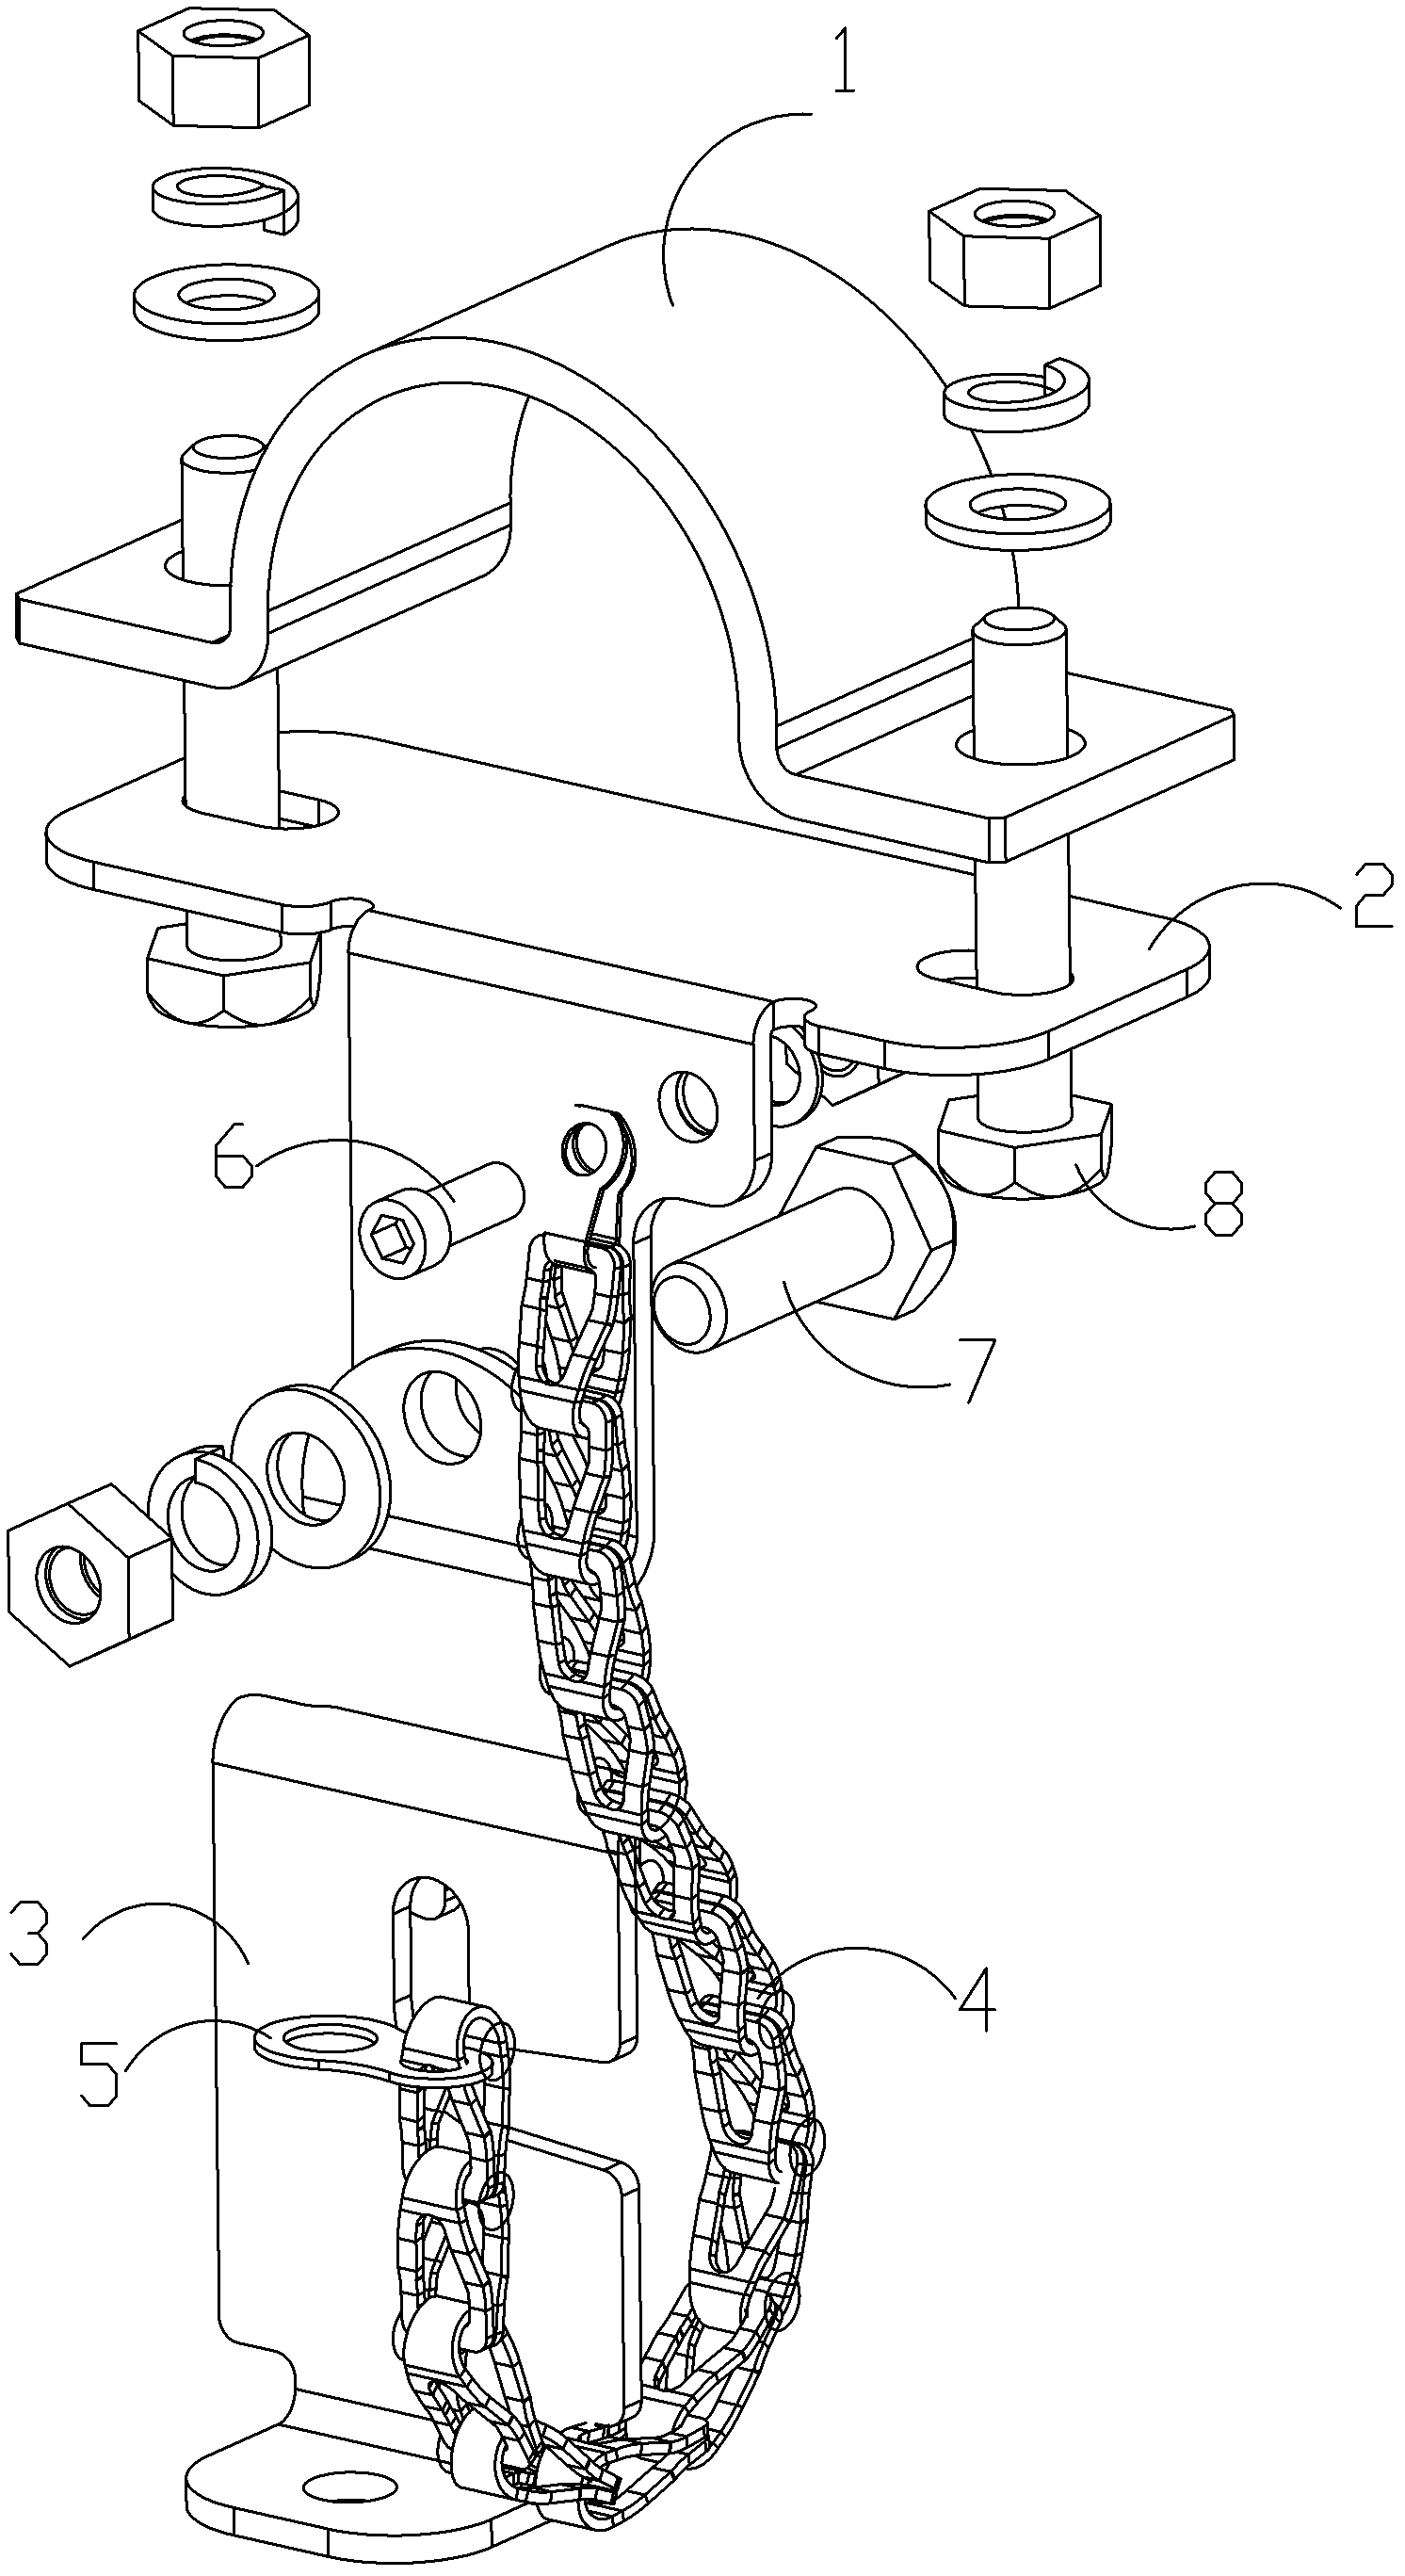 Lamp mounting structure and lighting device